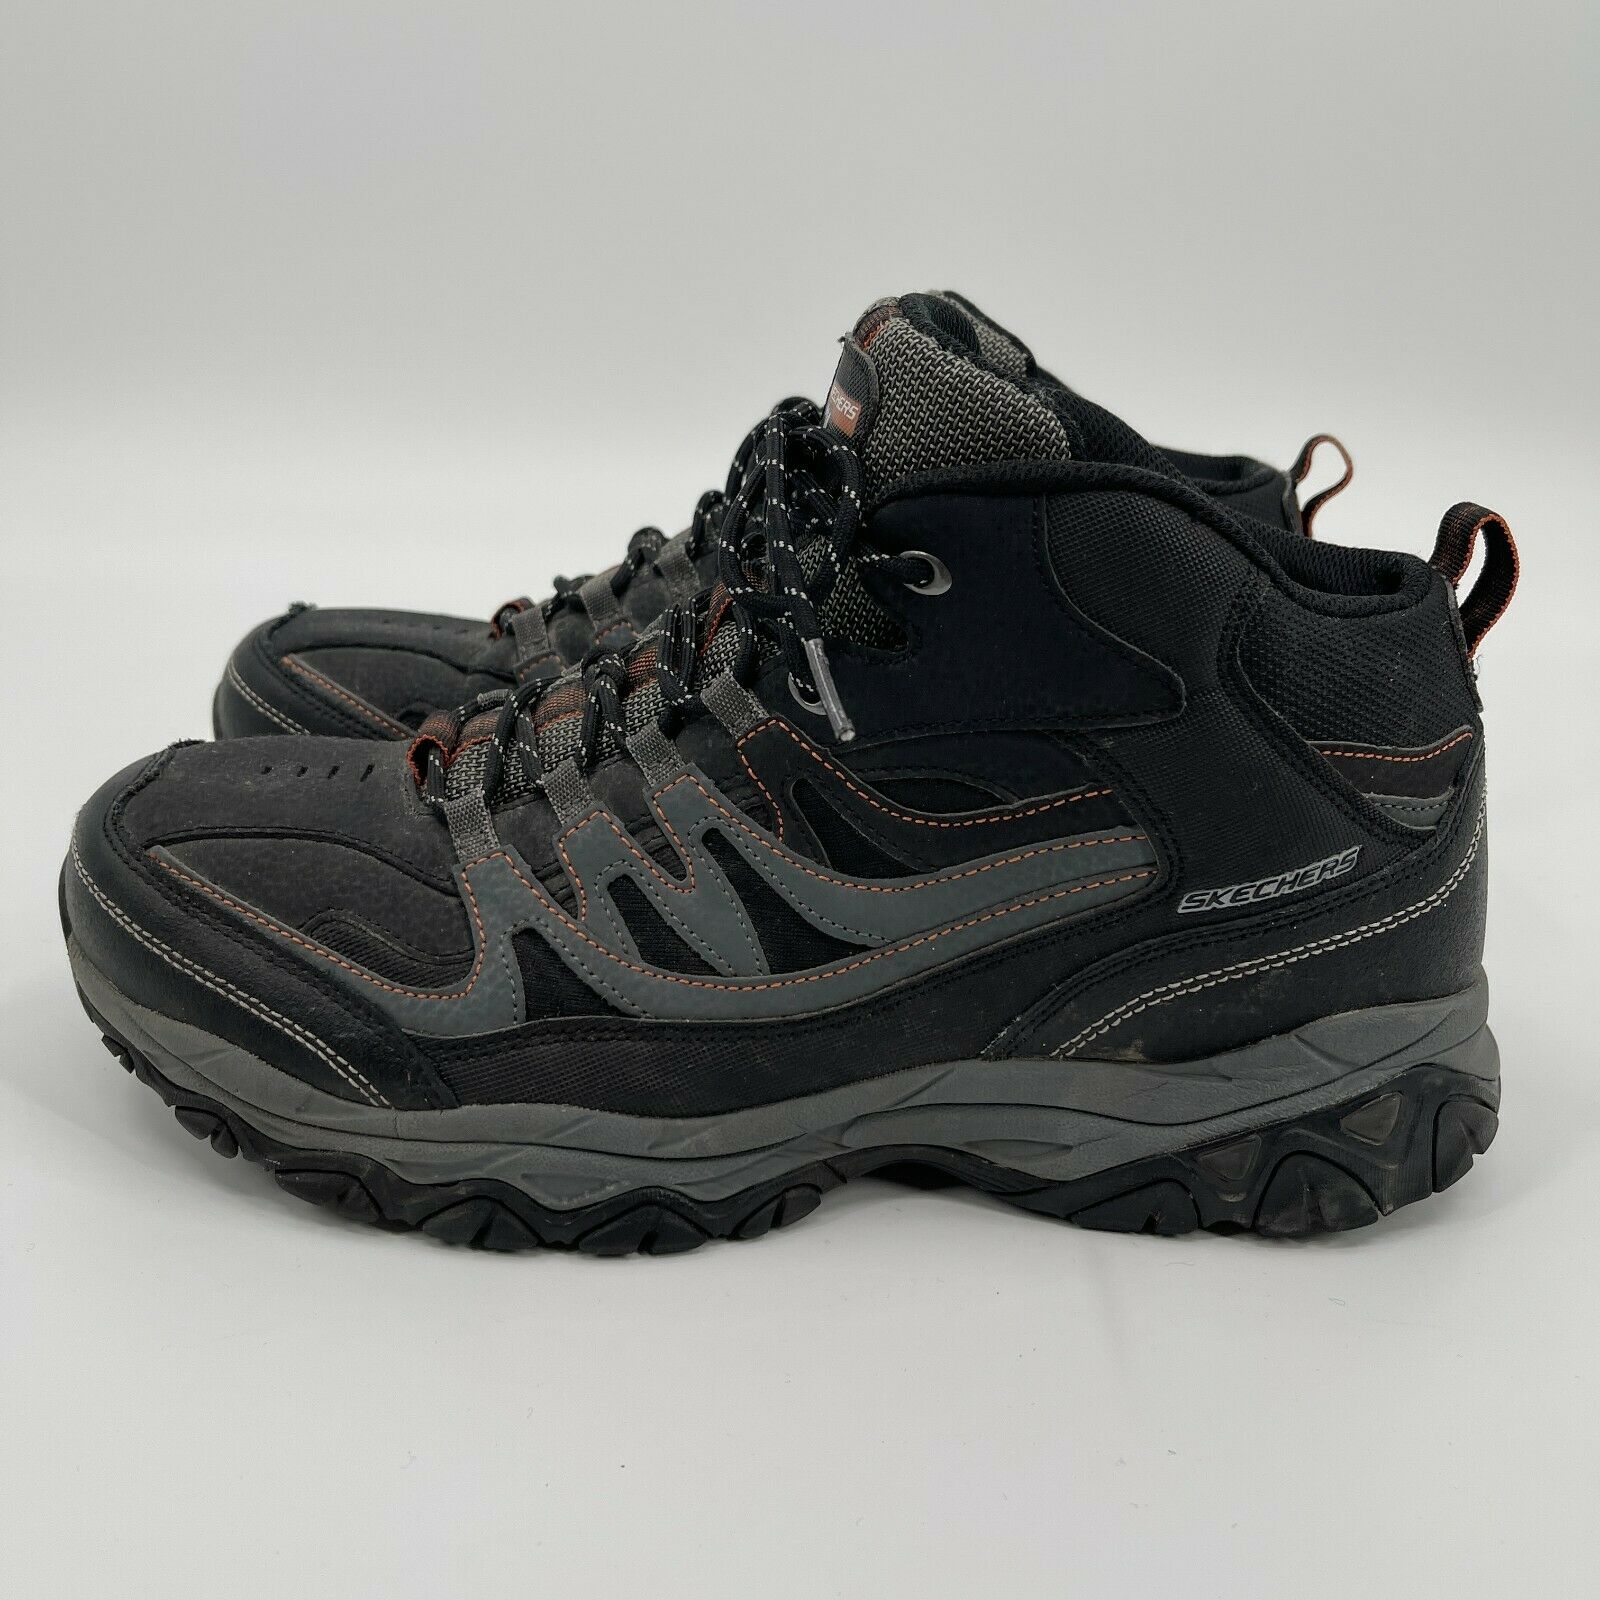 Skechers M-Fit Black Gray Hiking Casual Boots Shoes Men’s Size 12 EWW Extra Wide